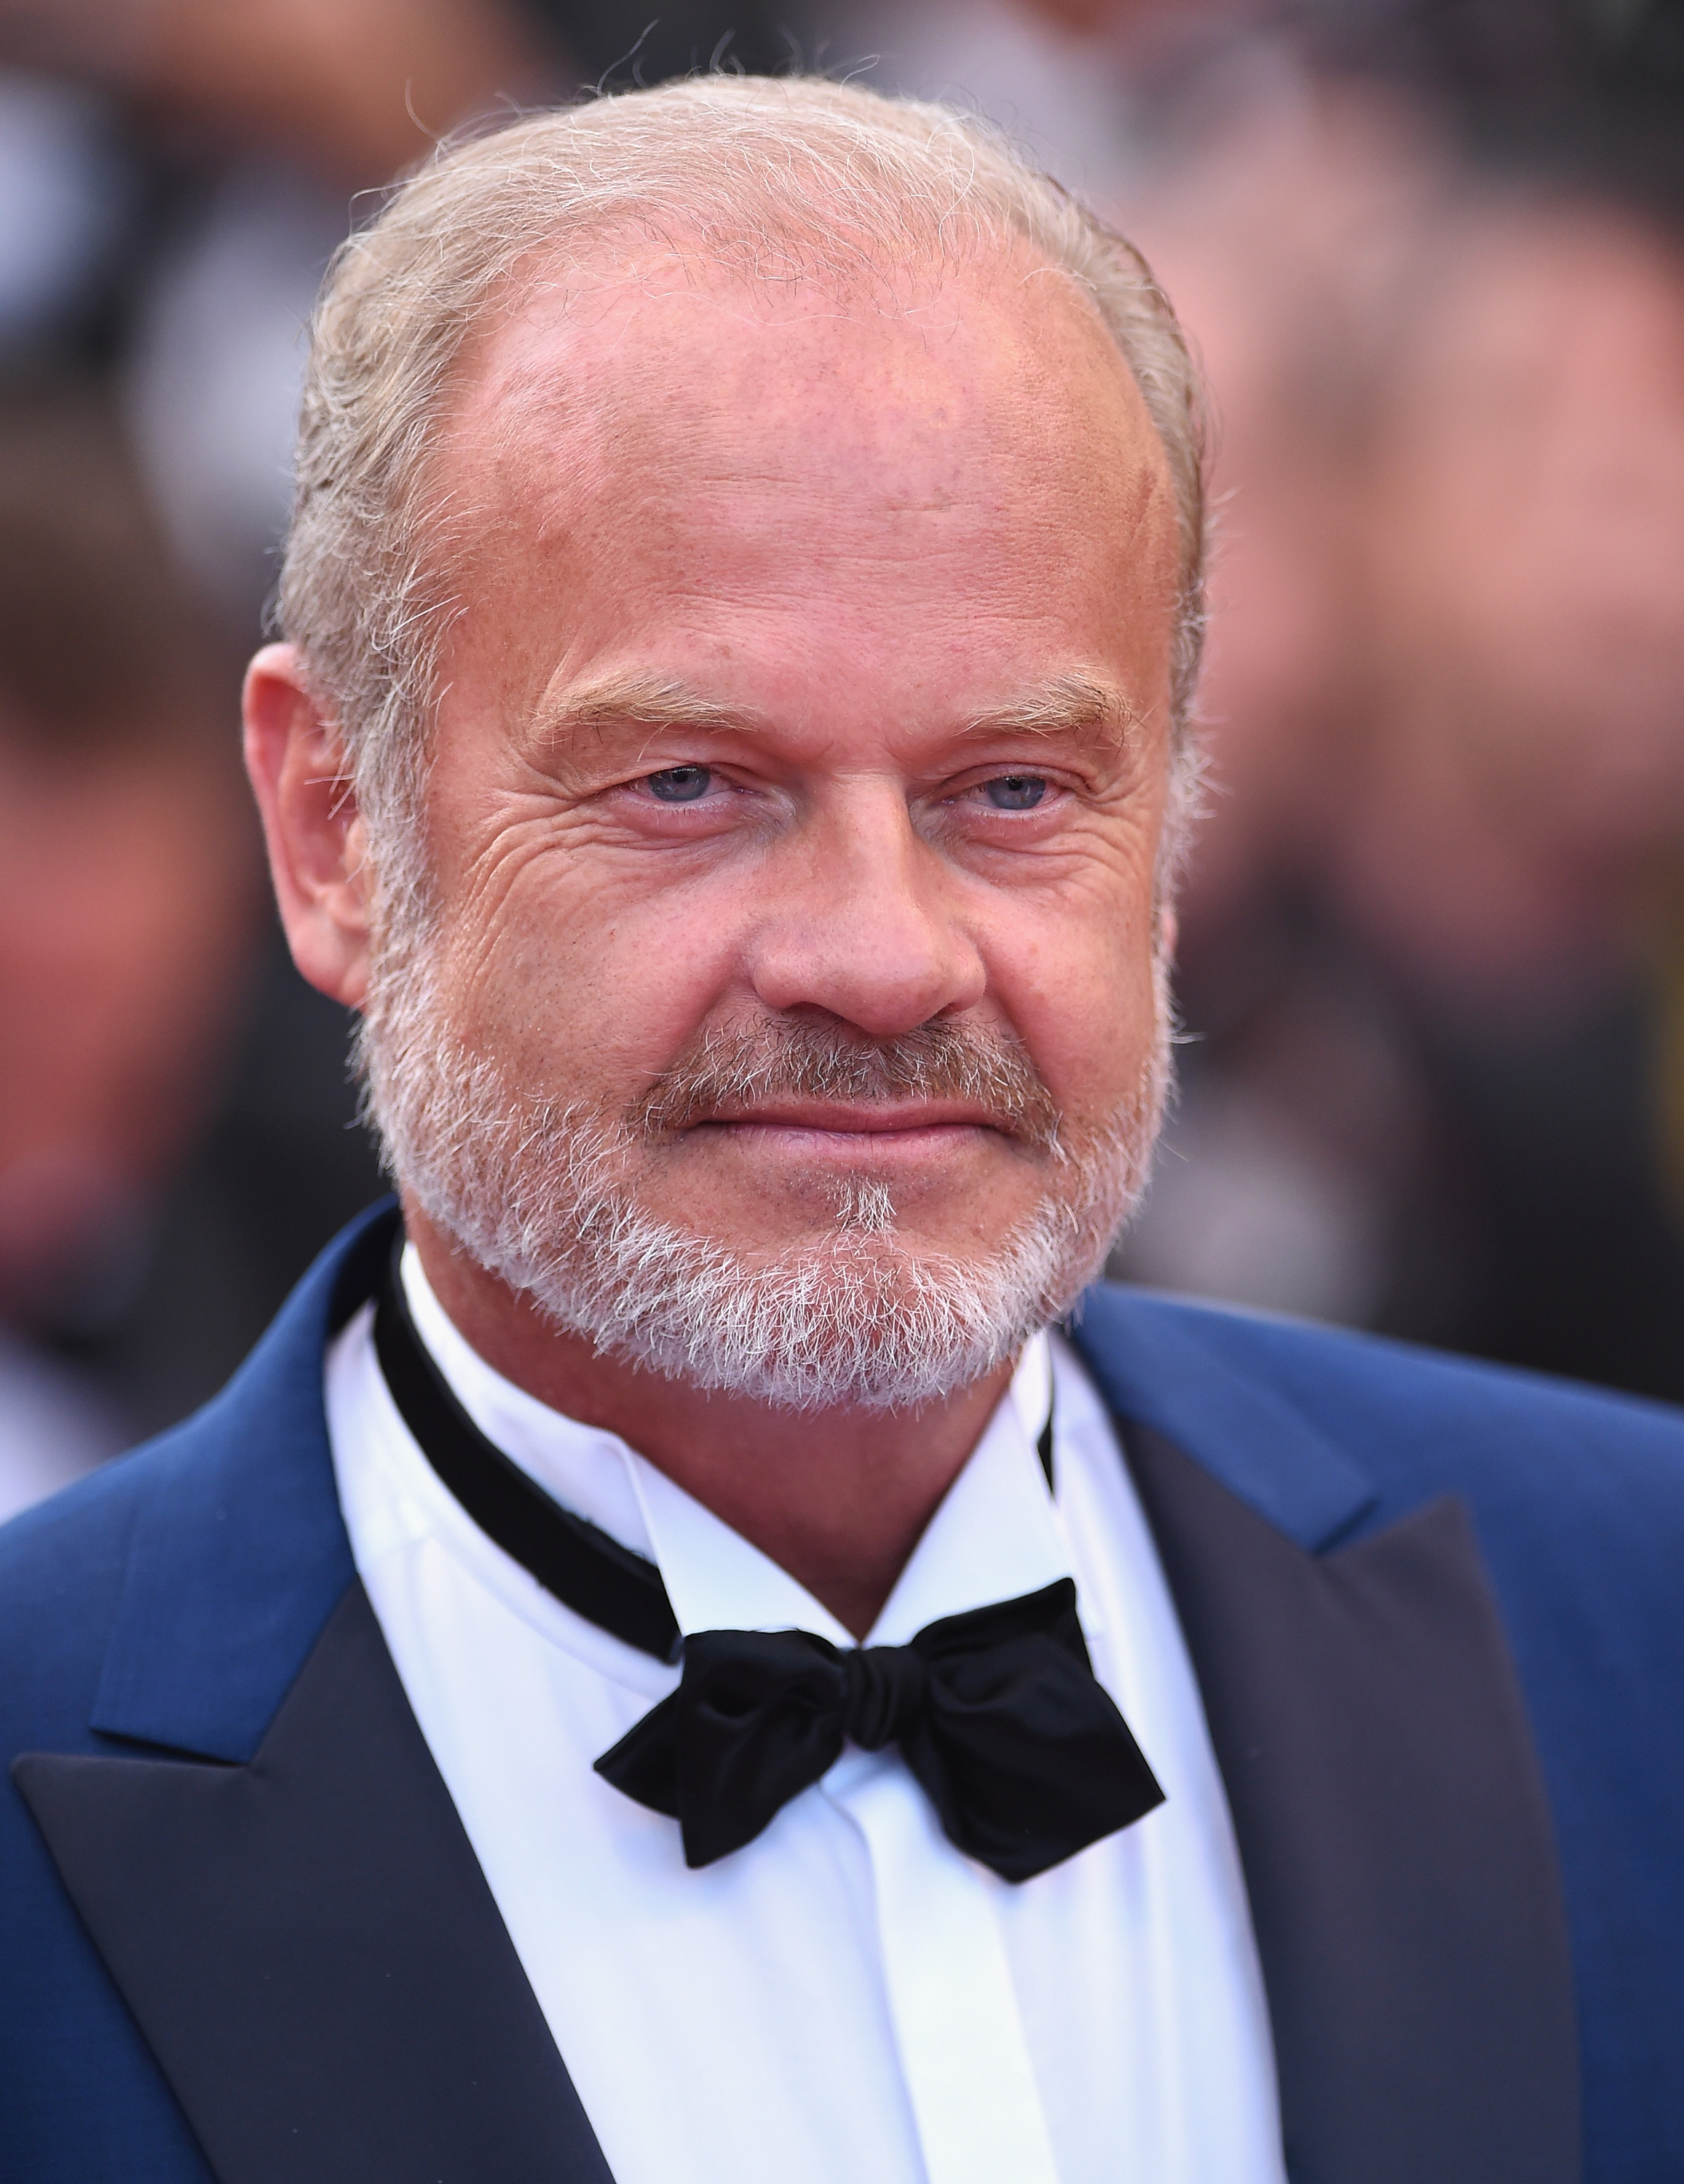 Actor Kelsey Grammer attends the "The Expendables 3" premiere during the 67th Annual Cannes Film Festival on May 18, 2014 in Cannes, France. | Source: Getty Images